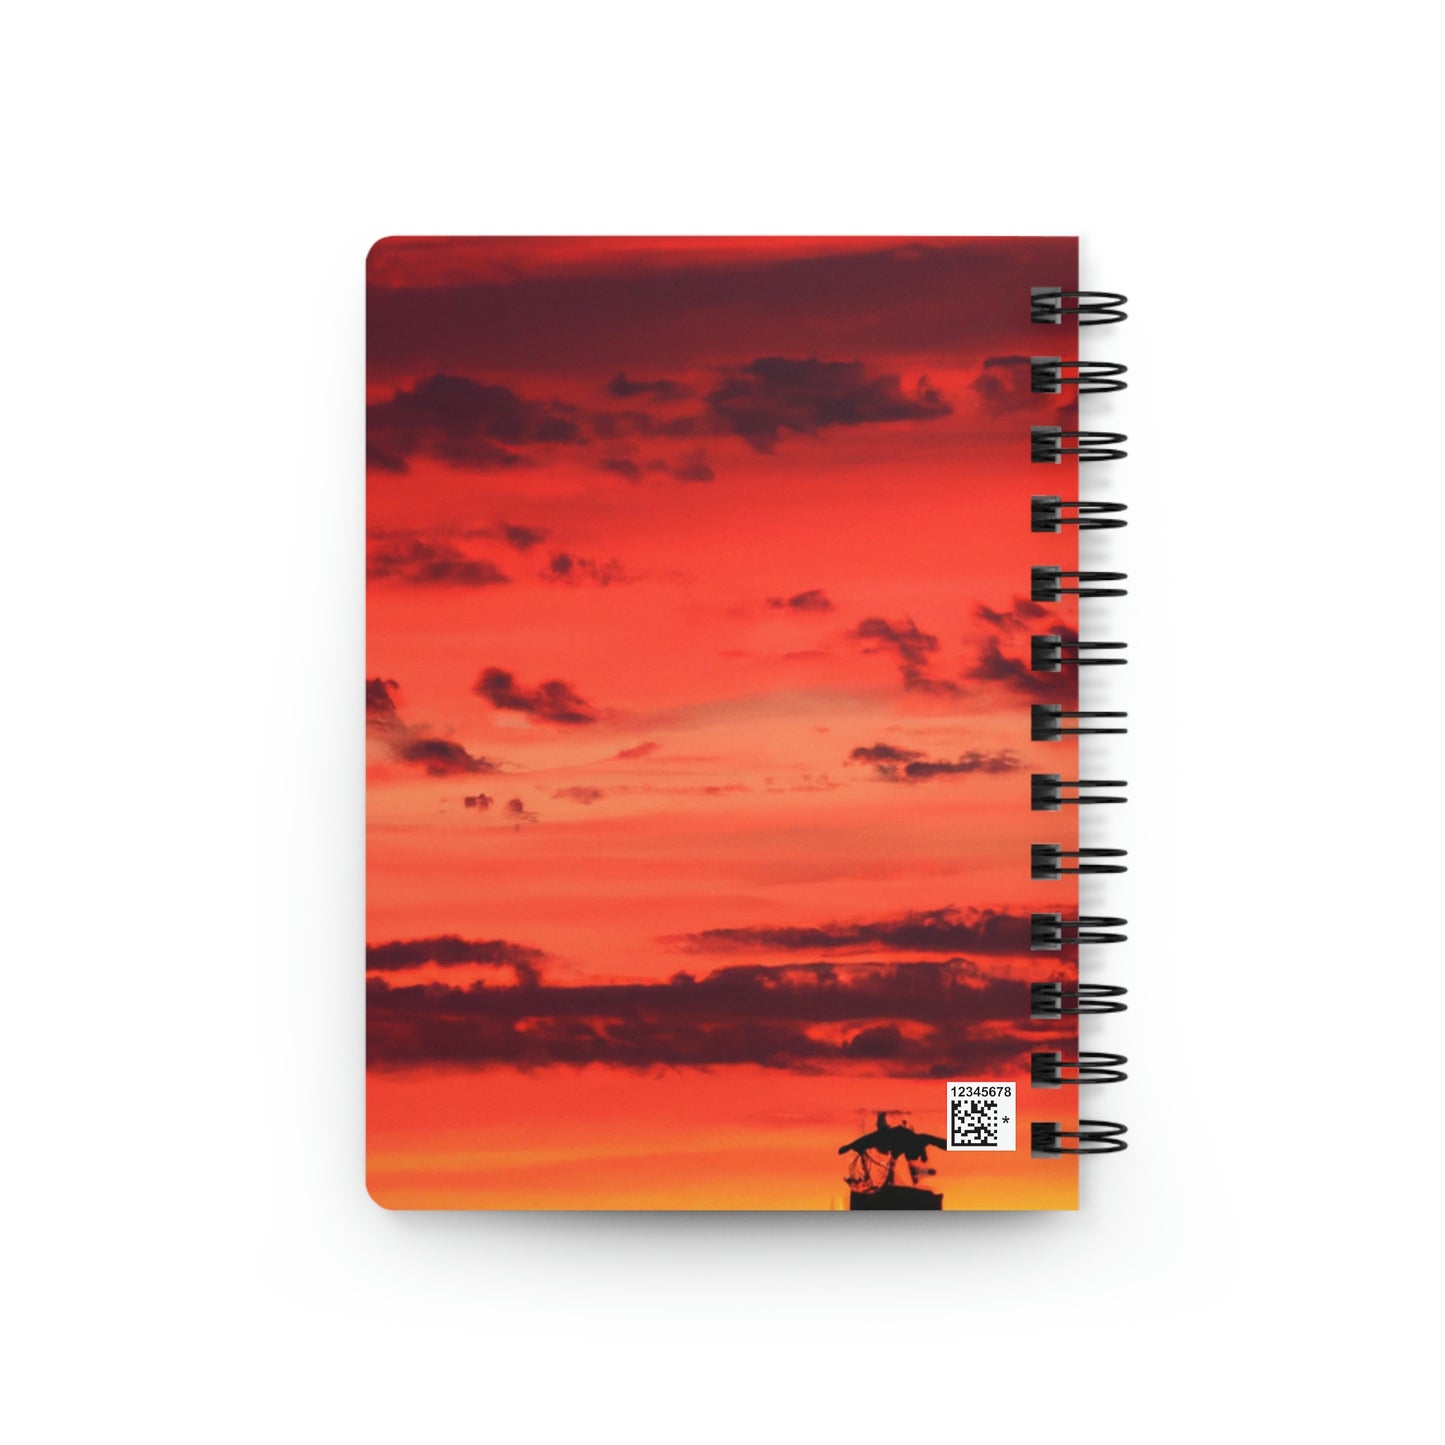 "Lonely Lighthouse on Fire" - The Alien Spiral Bound Journal